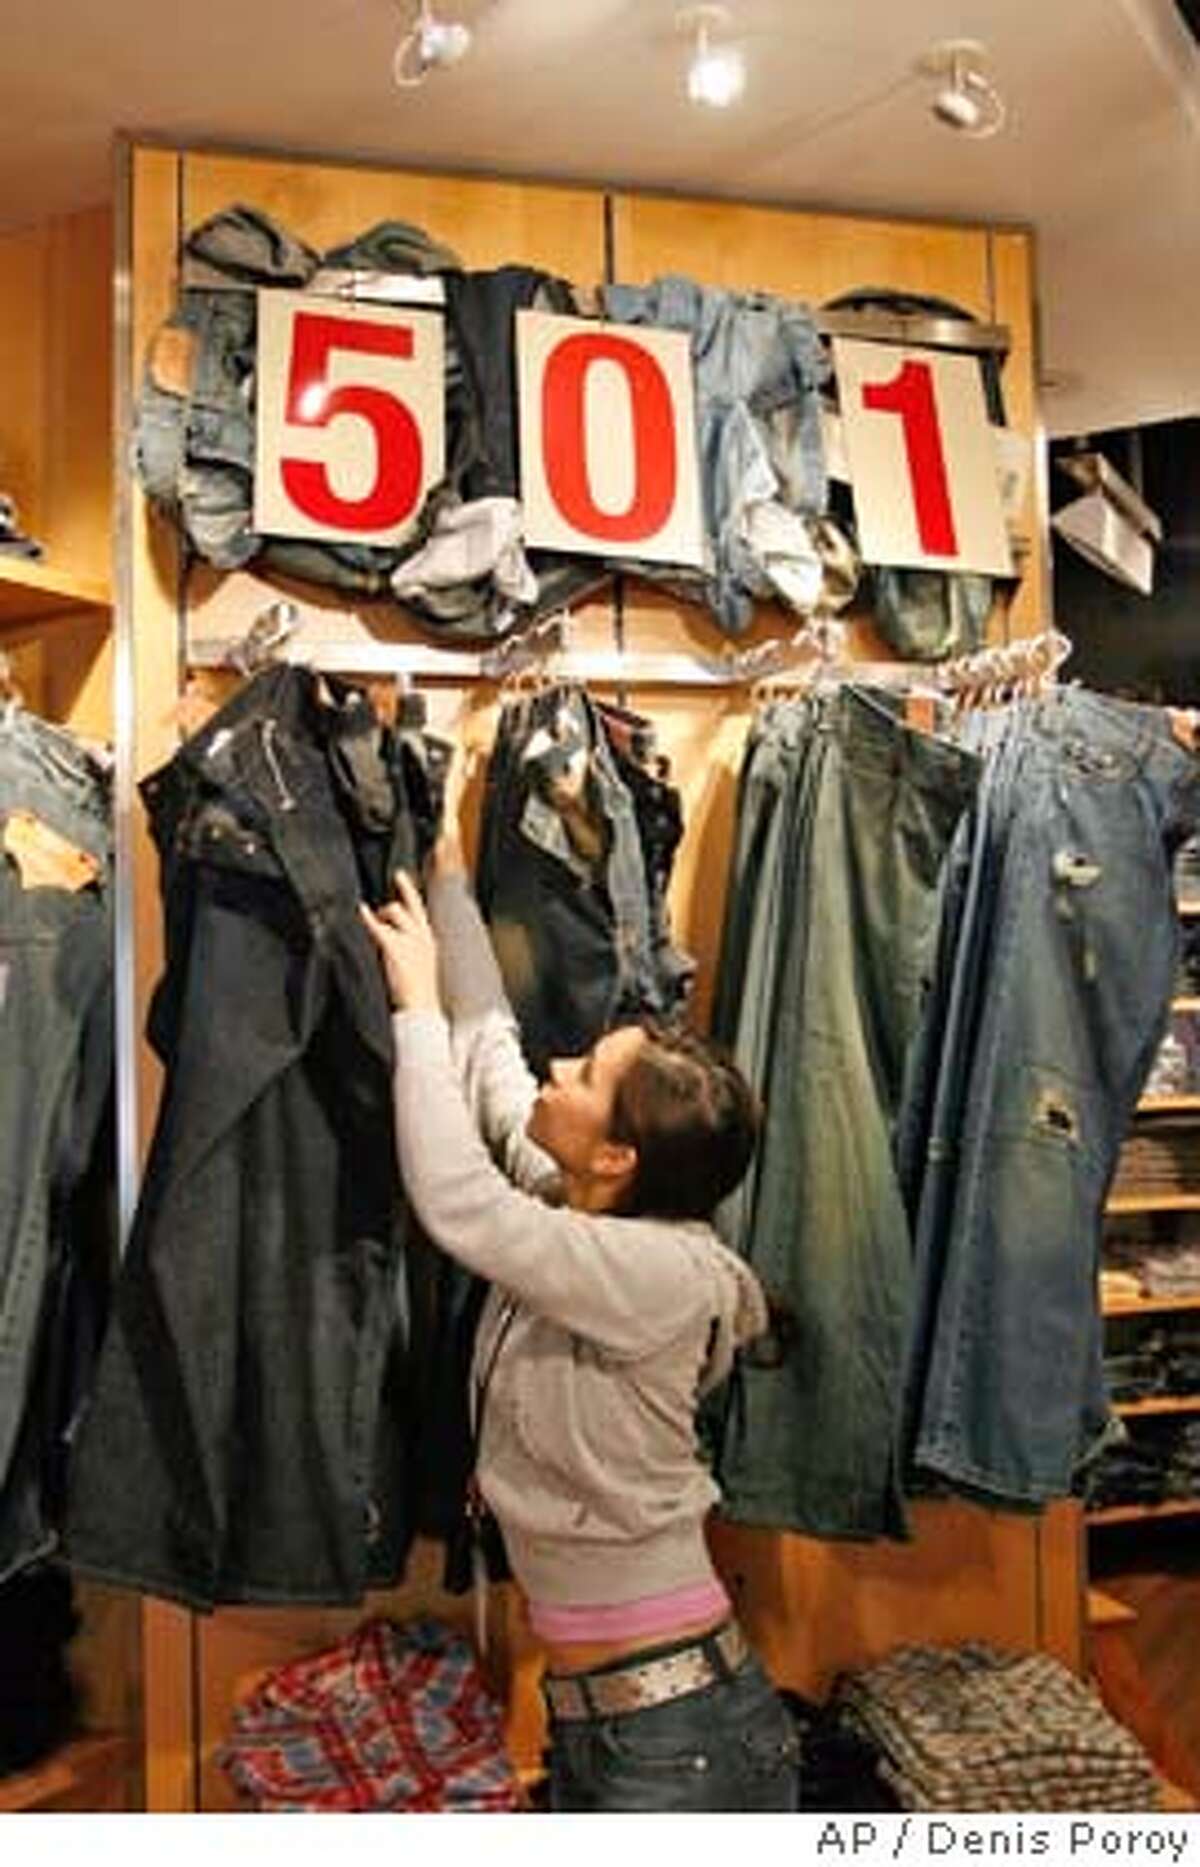 Levi's profit up 50%, but sales take a small hit / Tax benefit helps .  jeansmaker in 2nd quarter